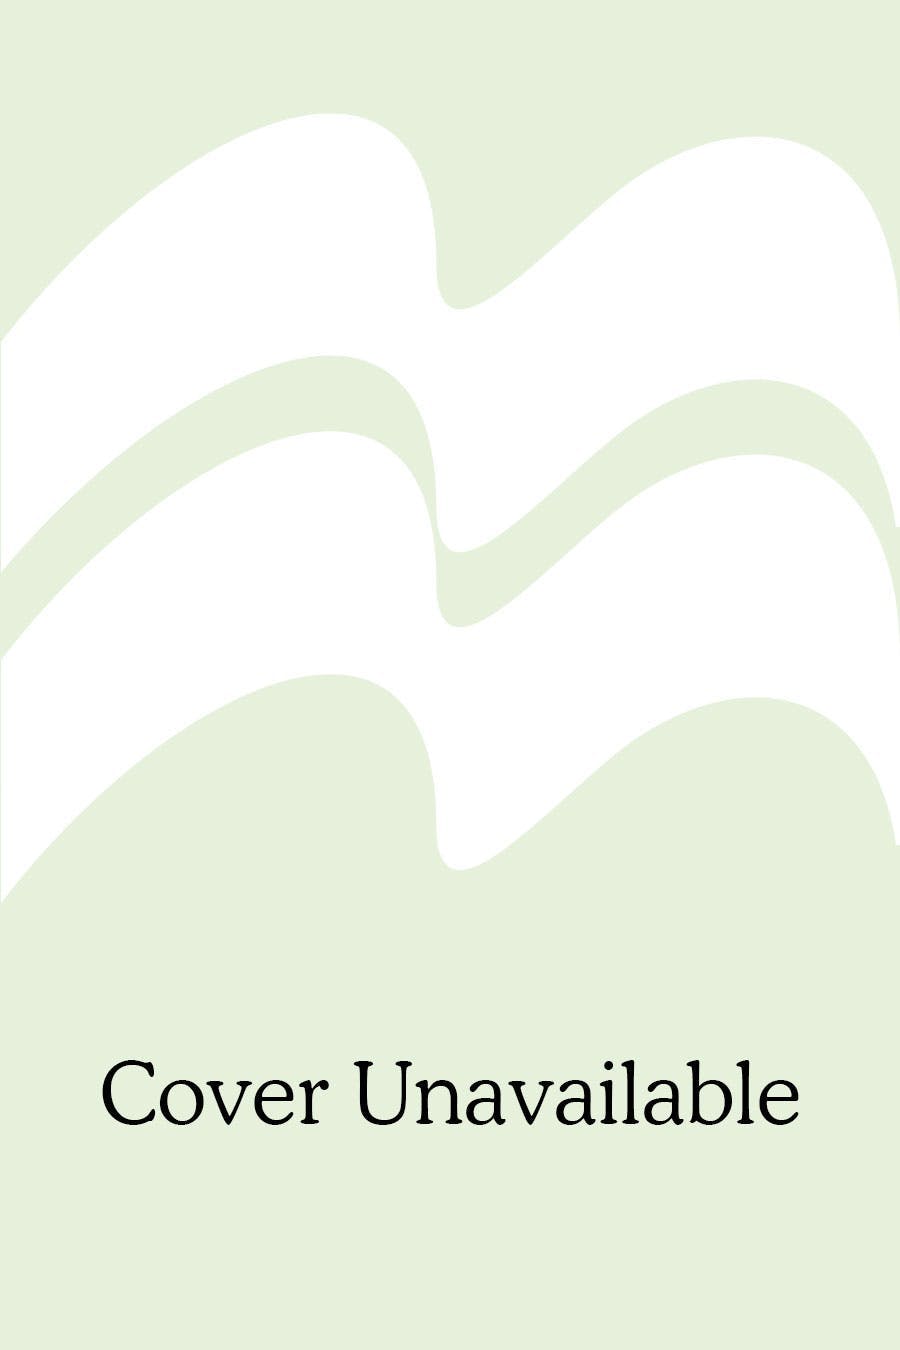 Cover for the book titled as: The Observers